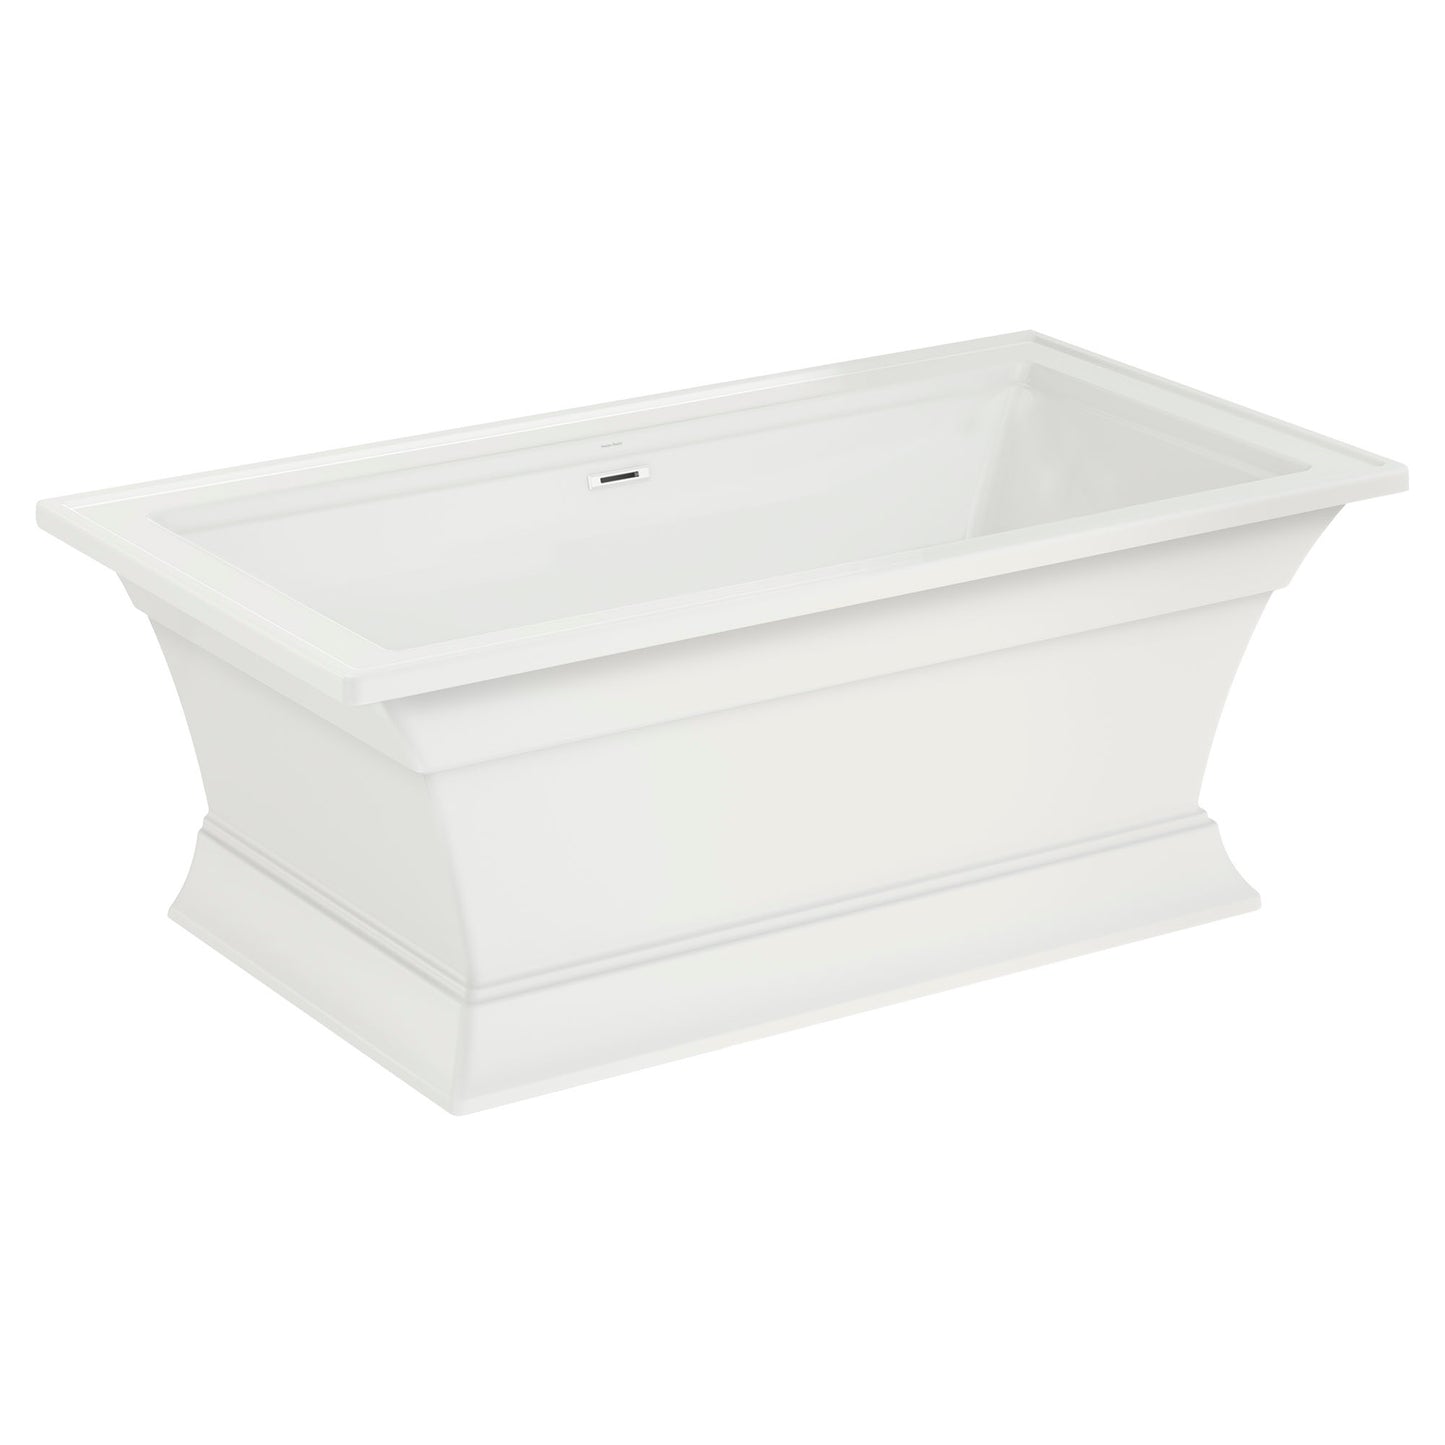 AMERICAN-STANDARD 2546004.020, Town Square S 68 x 36-Inch Freestanding Bathtub Center Drain With Integrated Overflow in White